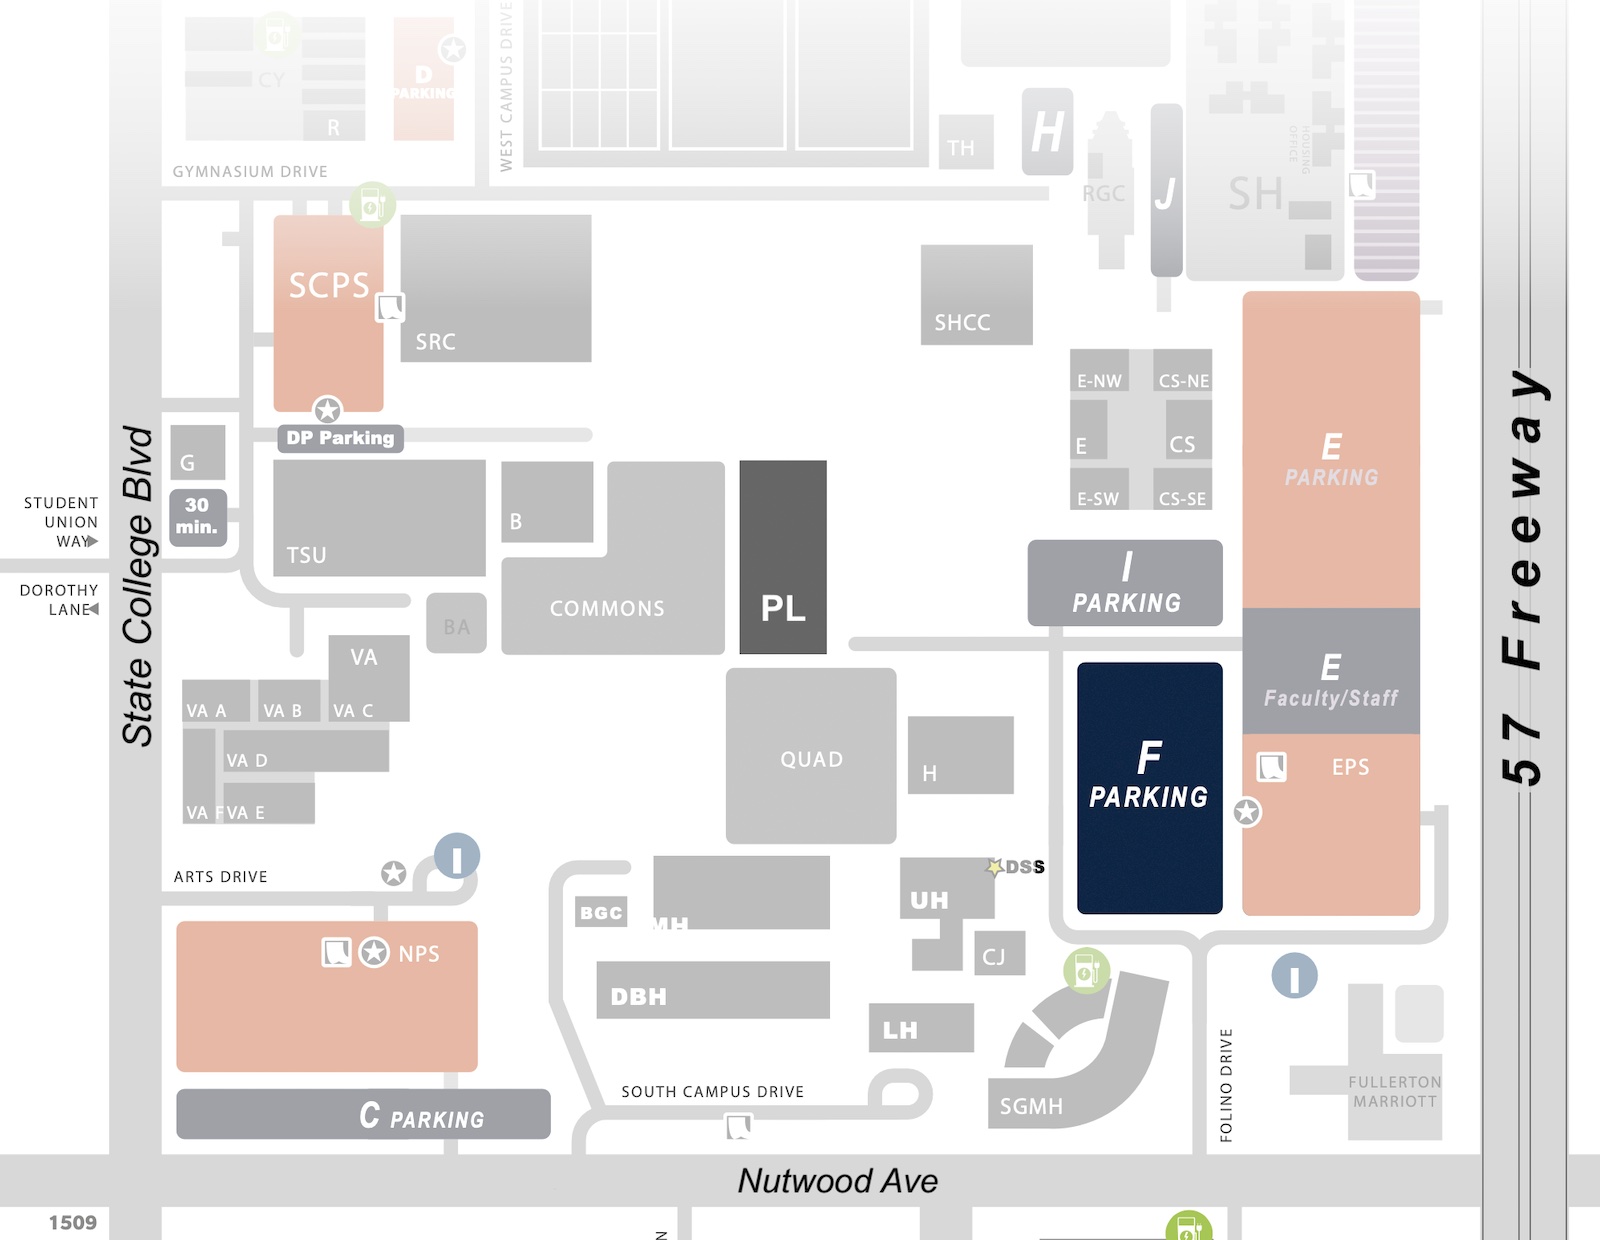 diagrammatic map of campus buildings and parking lots at CSU Fullerton, showing an area bounded by State College Blvd, Nutwood Ave, and the 57 Freeway. Parking lot F and Building "PL" are marked prominently